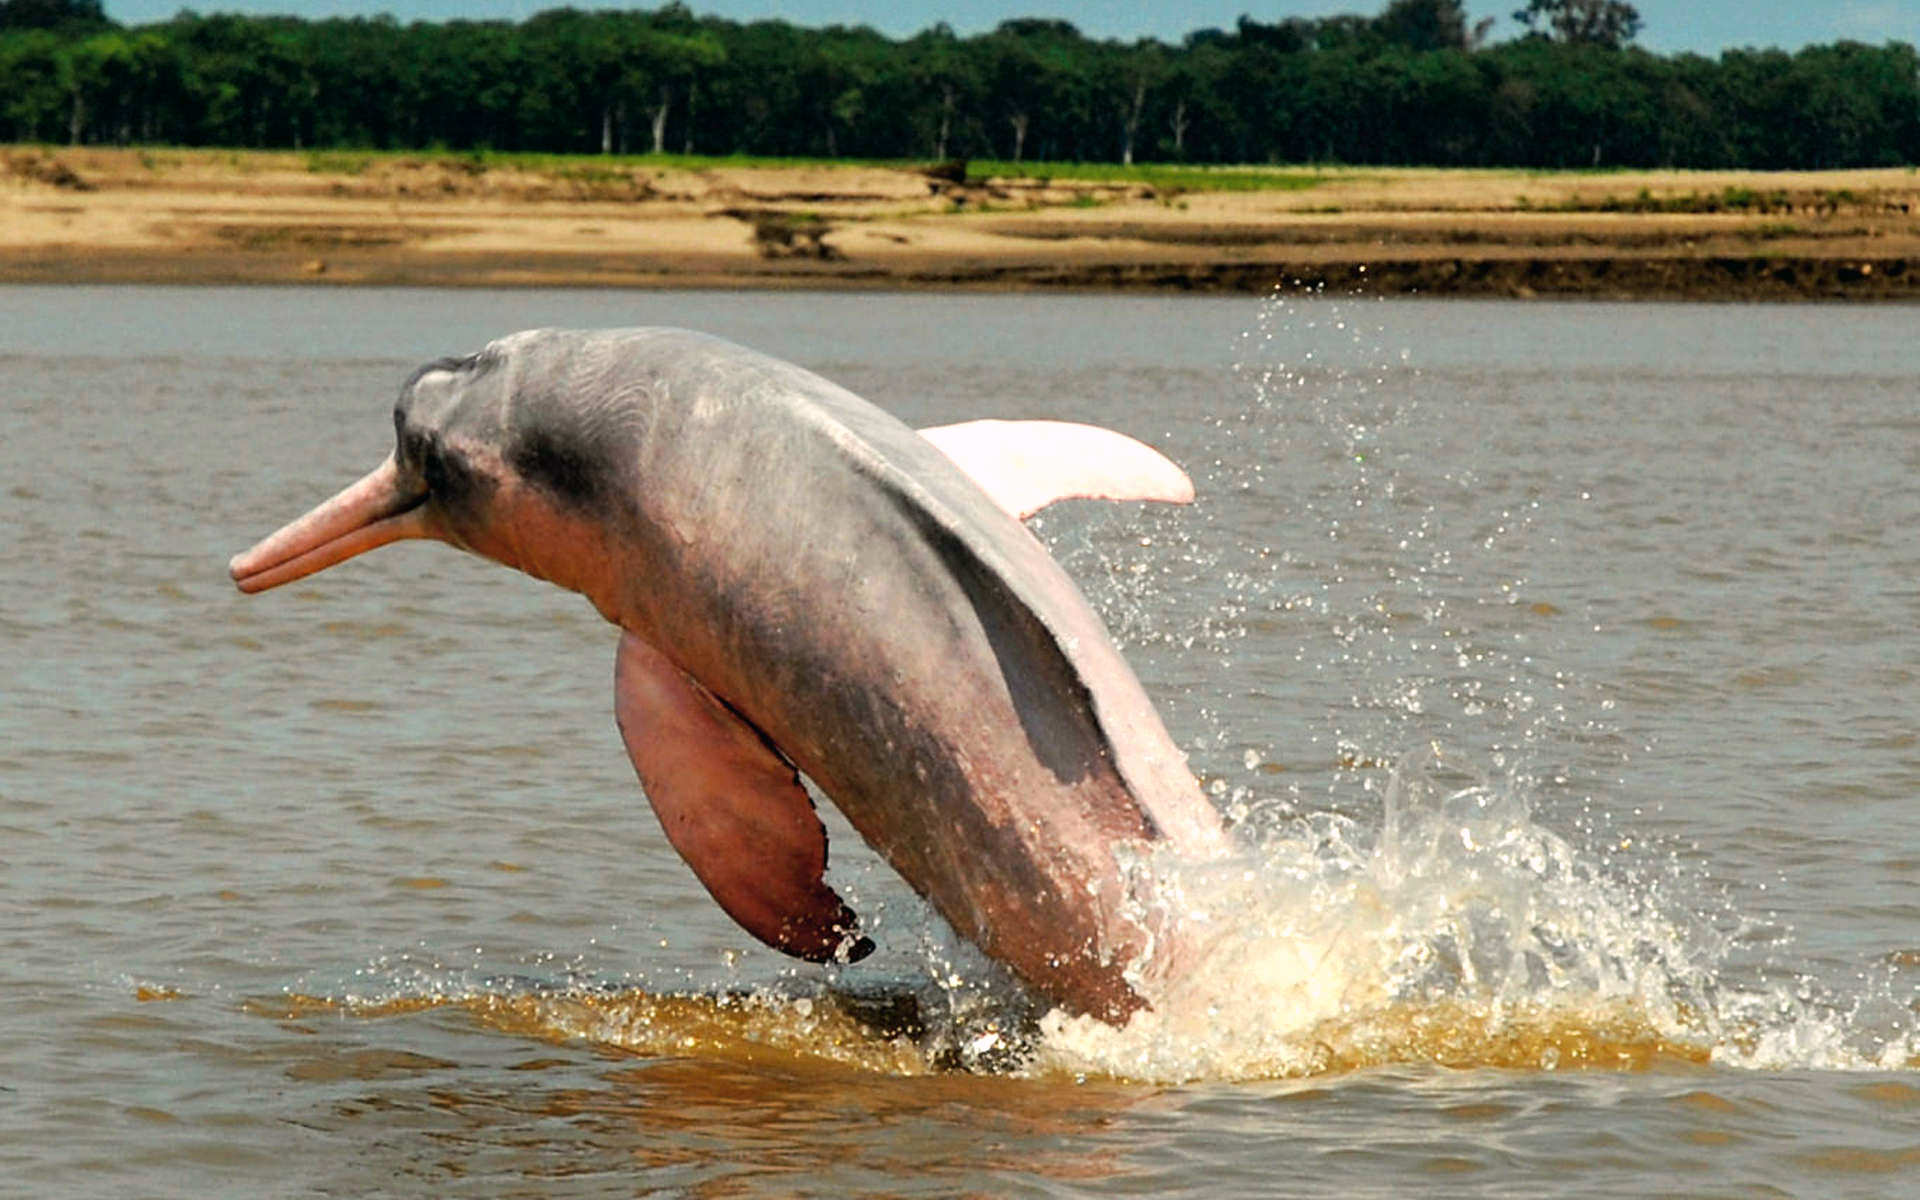 The pink dolphin is one of the stars in the Amazonian waters.